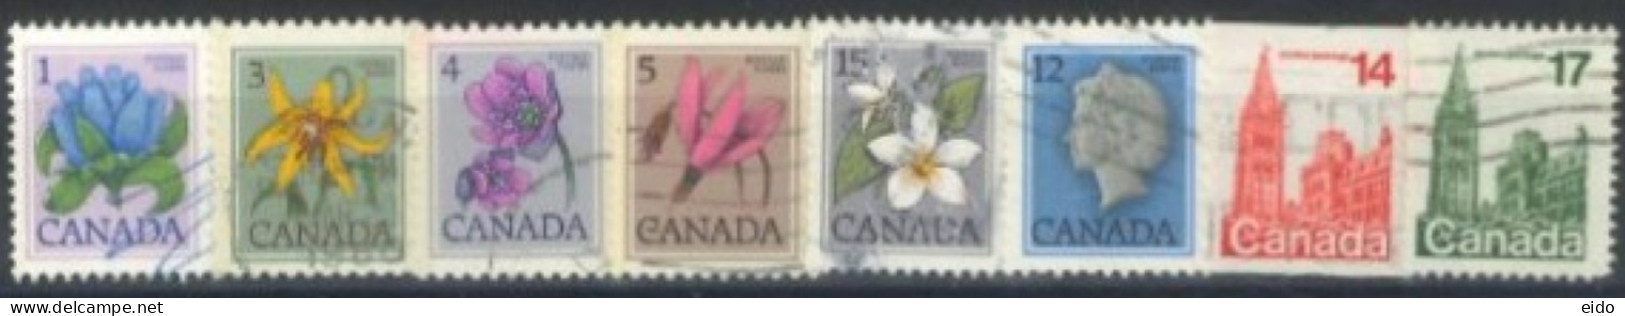 CANADA - 1977, QUEEN ELIZABETH II, HOUSE OF PARLIAMENT, FLOWERS STAMPS SET OF 8, USED. - Gebraucht